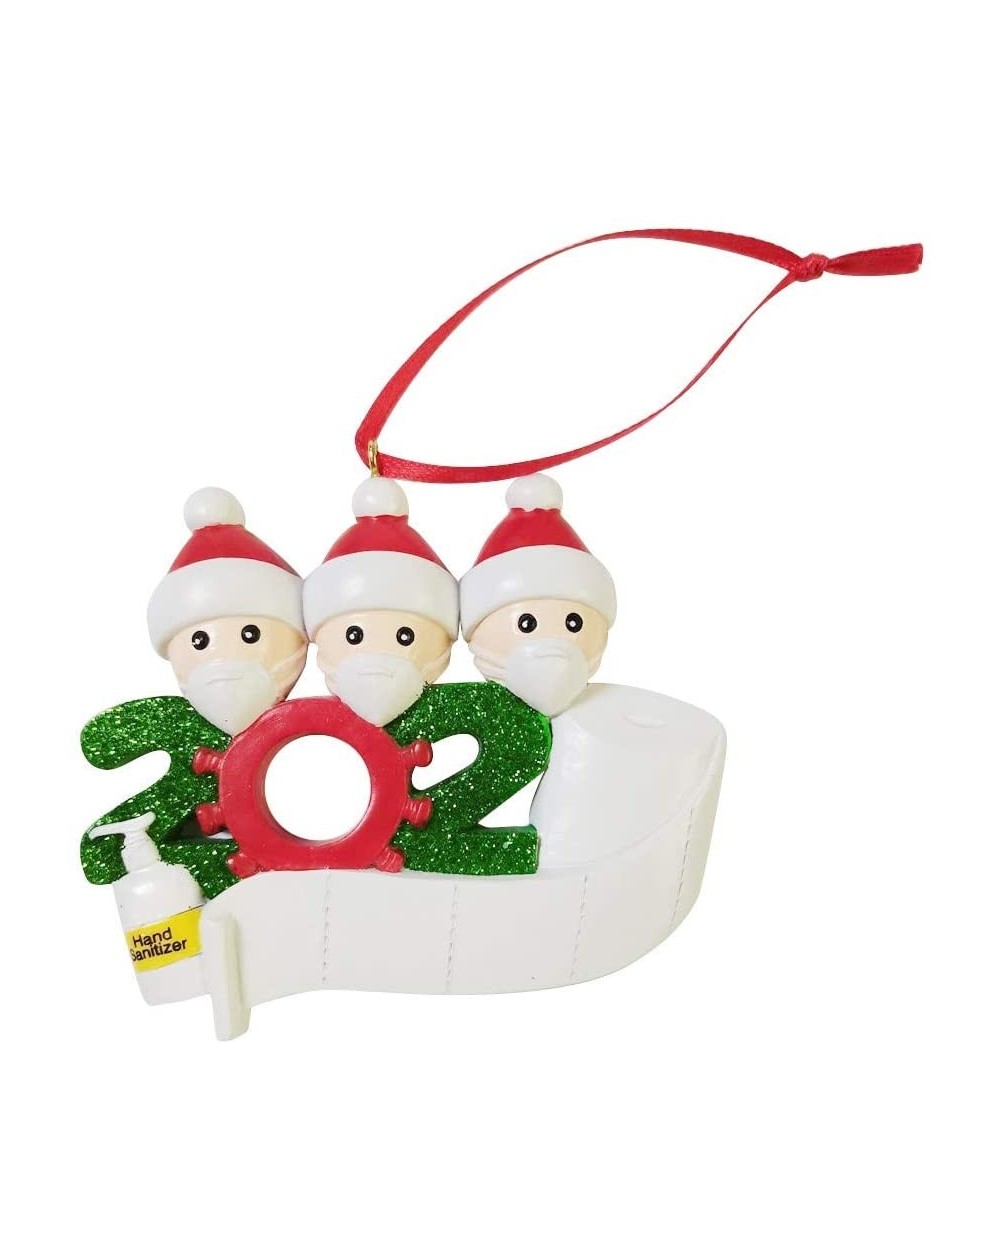 Ornaments 2020 Christmas Party Decorations Kit Creative Gift Survivor of 1-7 Members Ornaments1-3PC(1PC-3People-AD-Multi) - A...